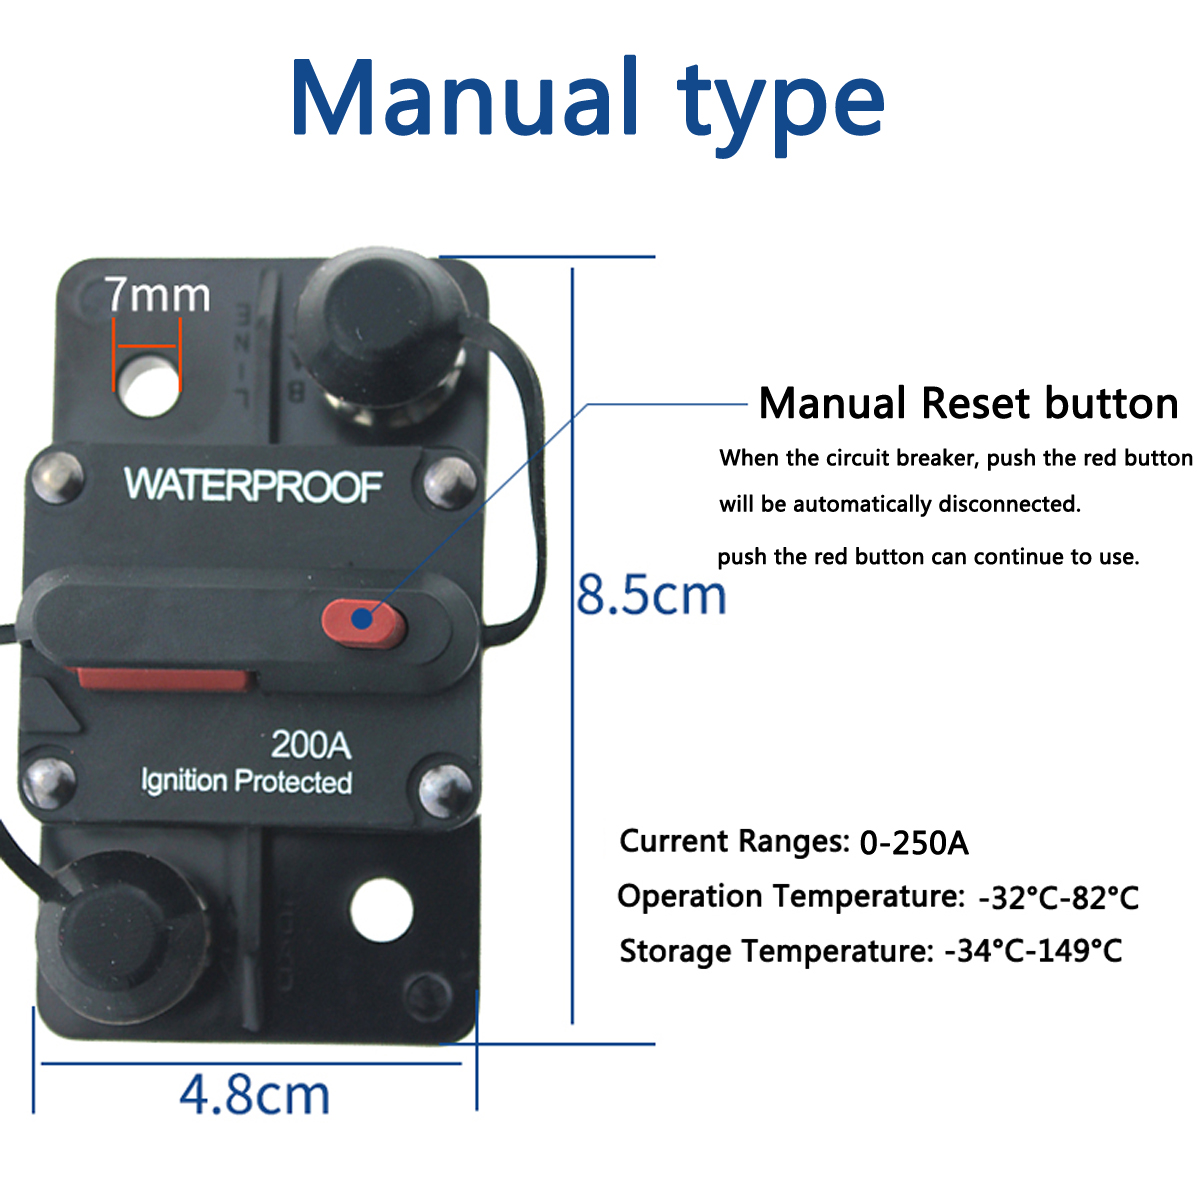 12V Photo-Top 40 Amp 48VDC,Surface-Mount & Waterproof Circuit Breakers with Manual Reset for Auto Boat Marine 